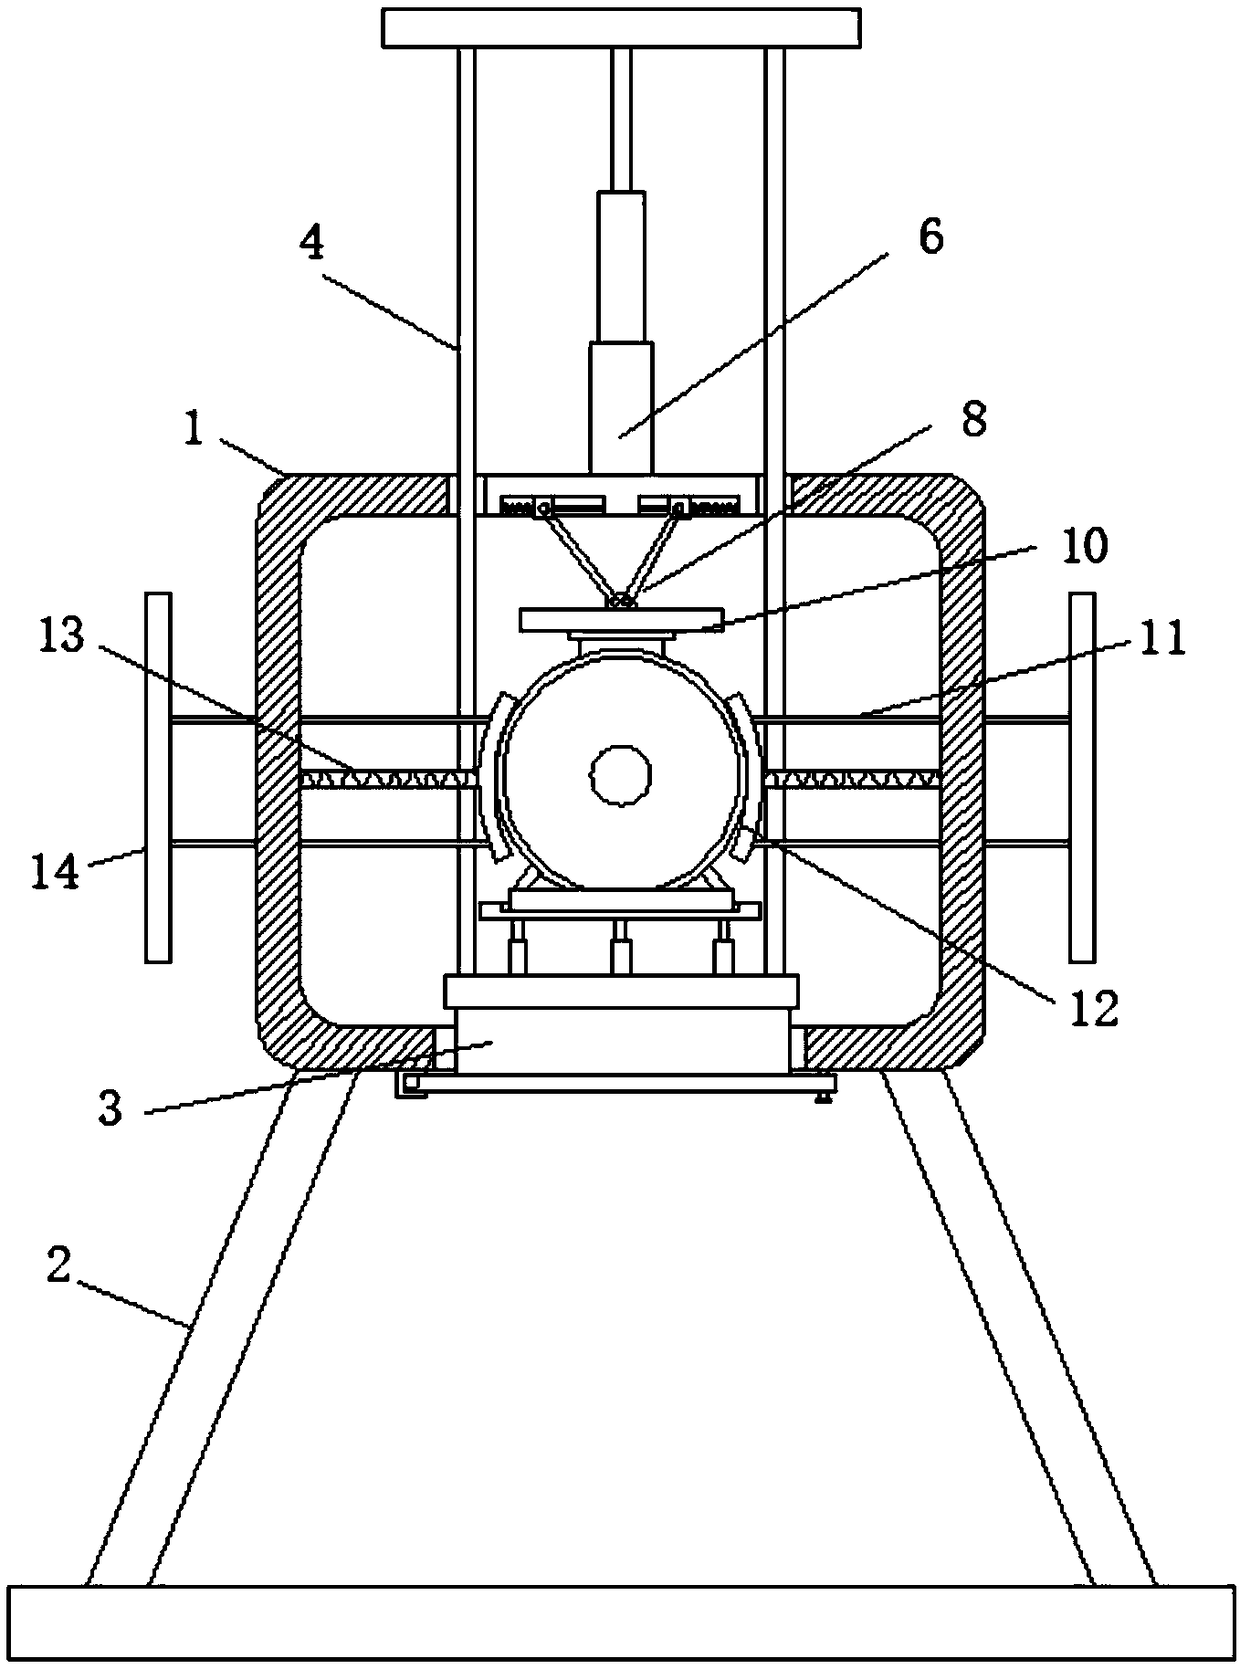 Numerically-controlled machine tool motor installing structure